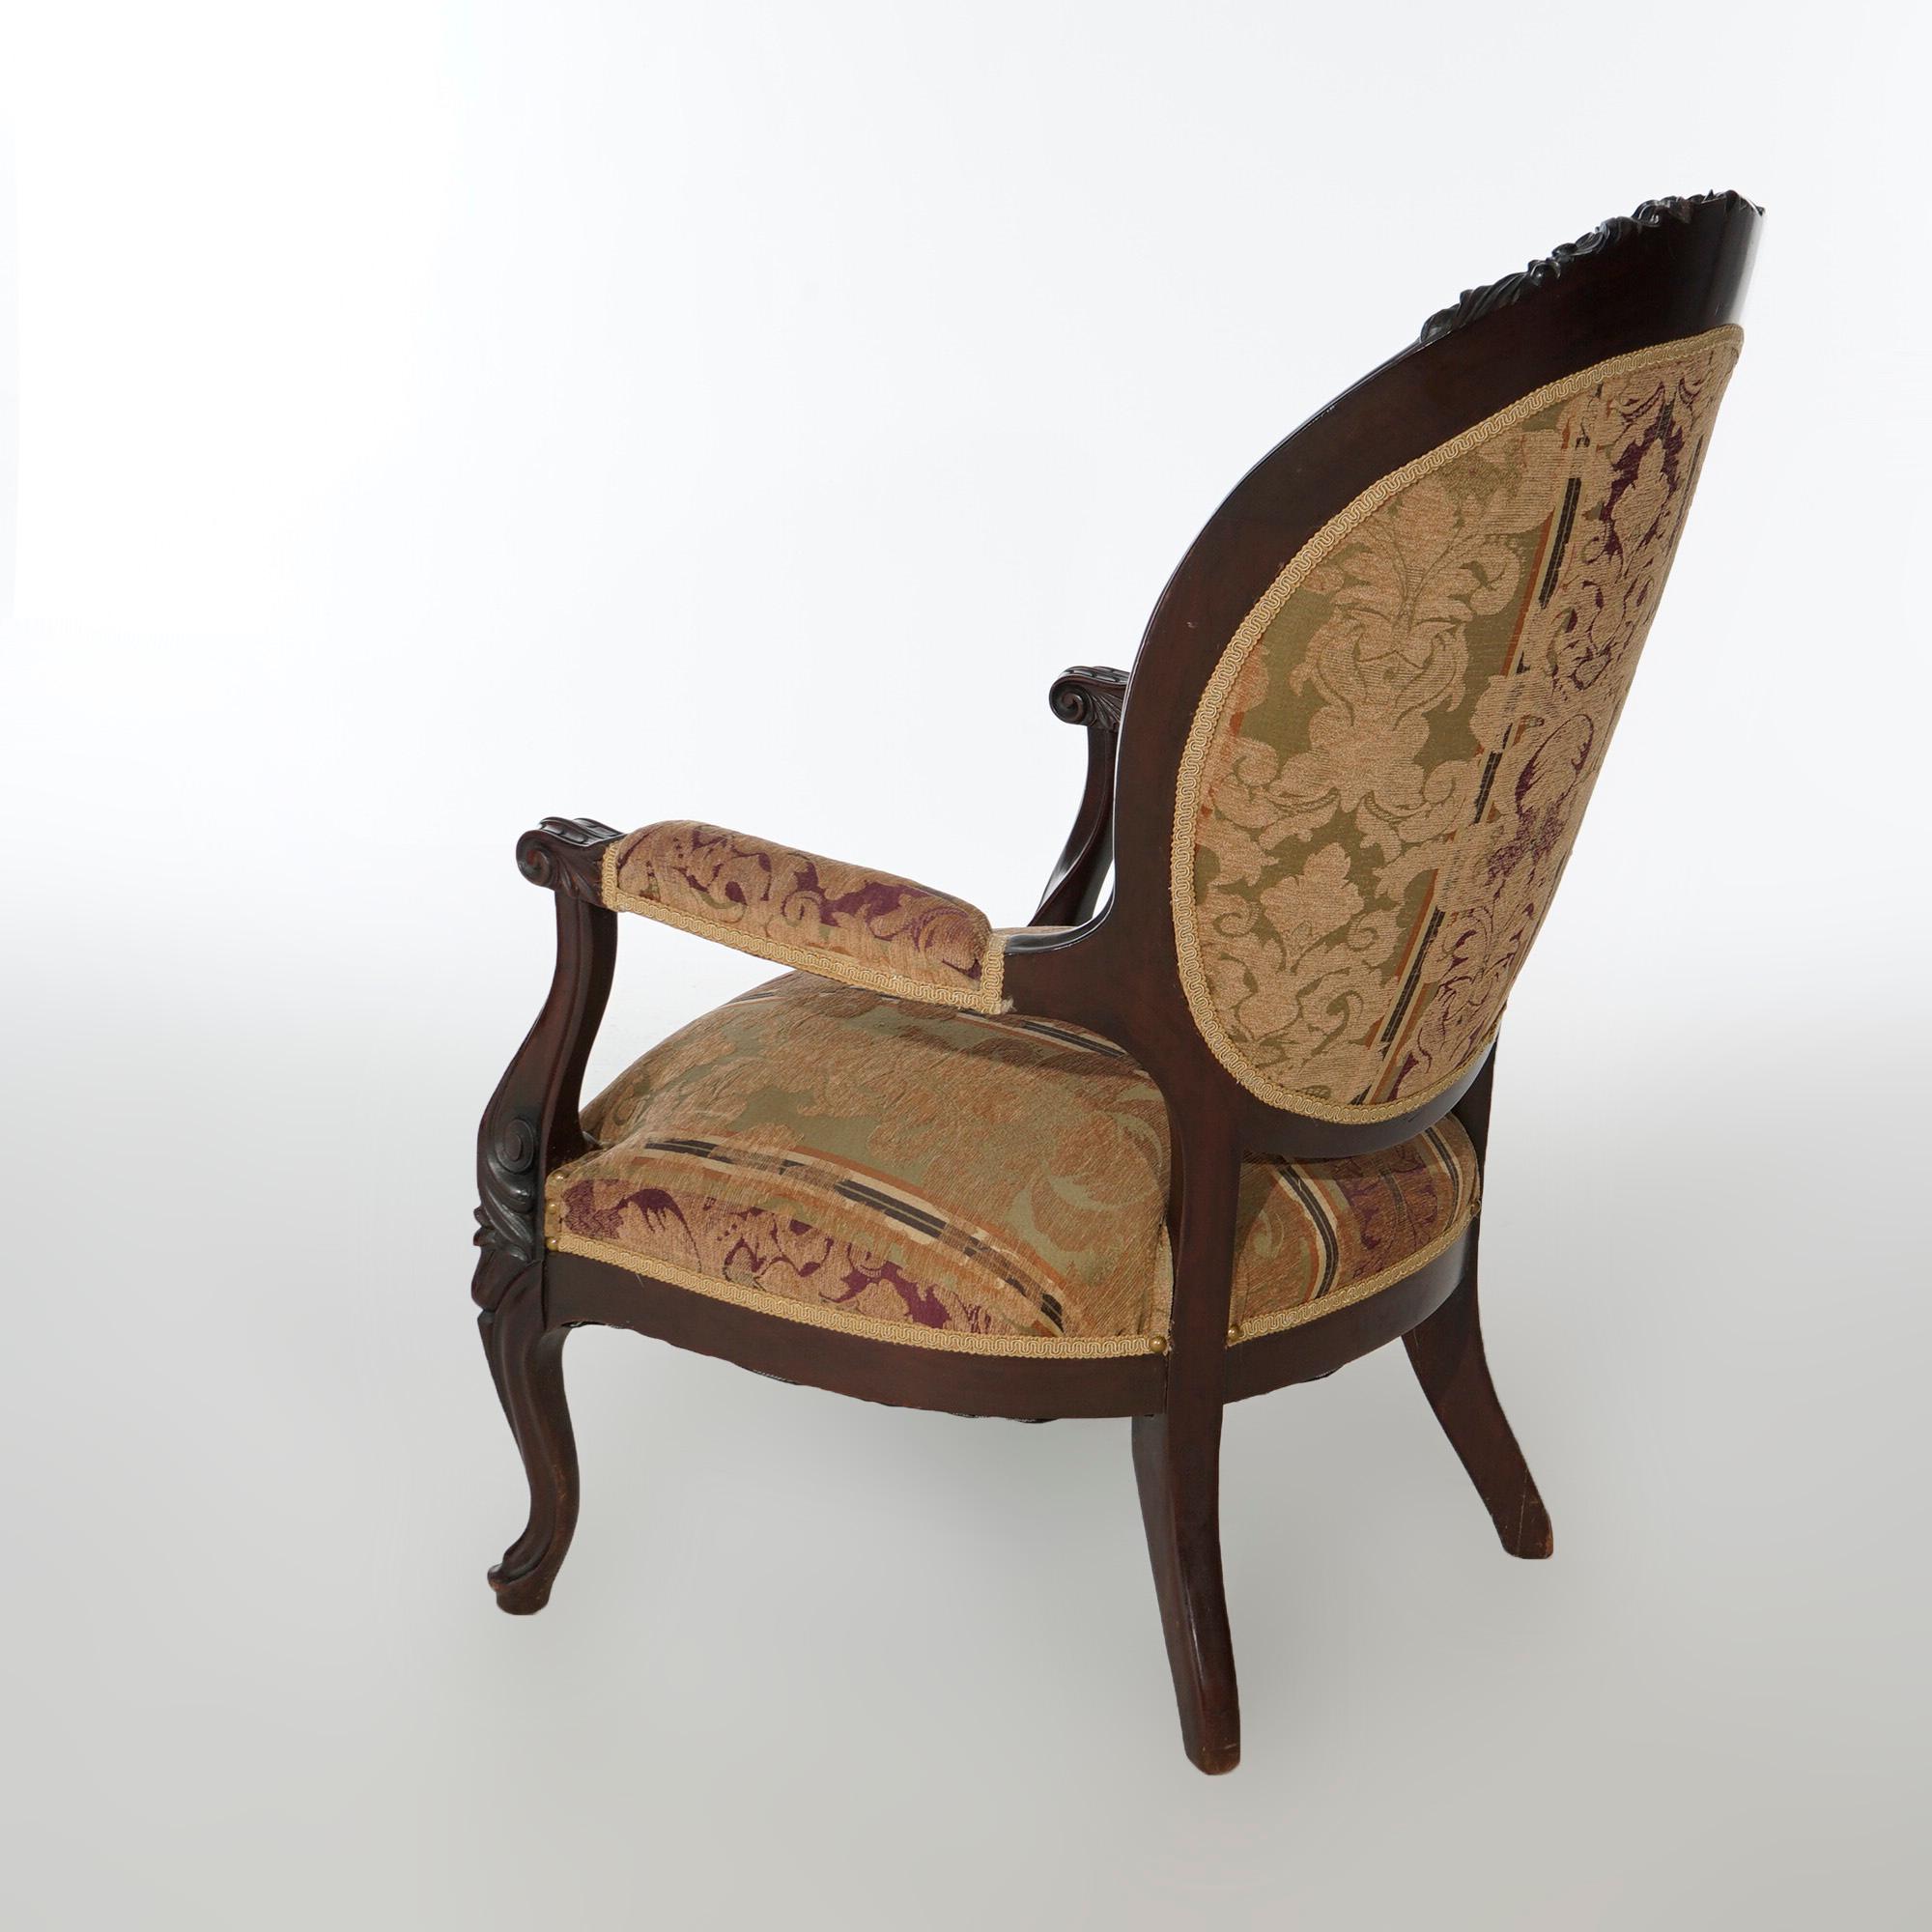 19th Century Antique Victorian Carved Walnut Upholstered Parlor Arm Chair Circa 1890